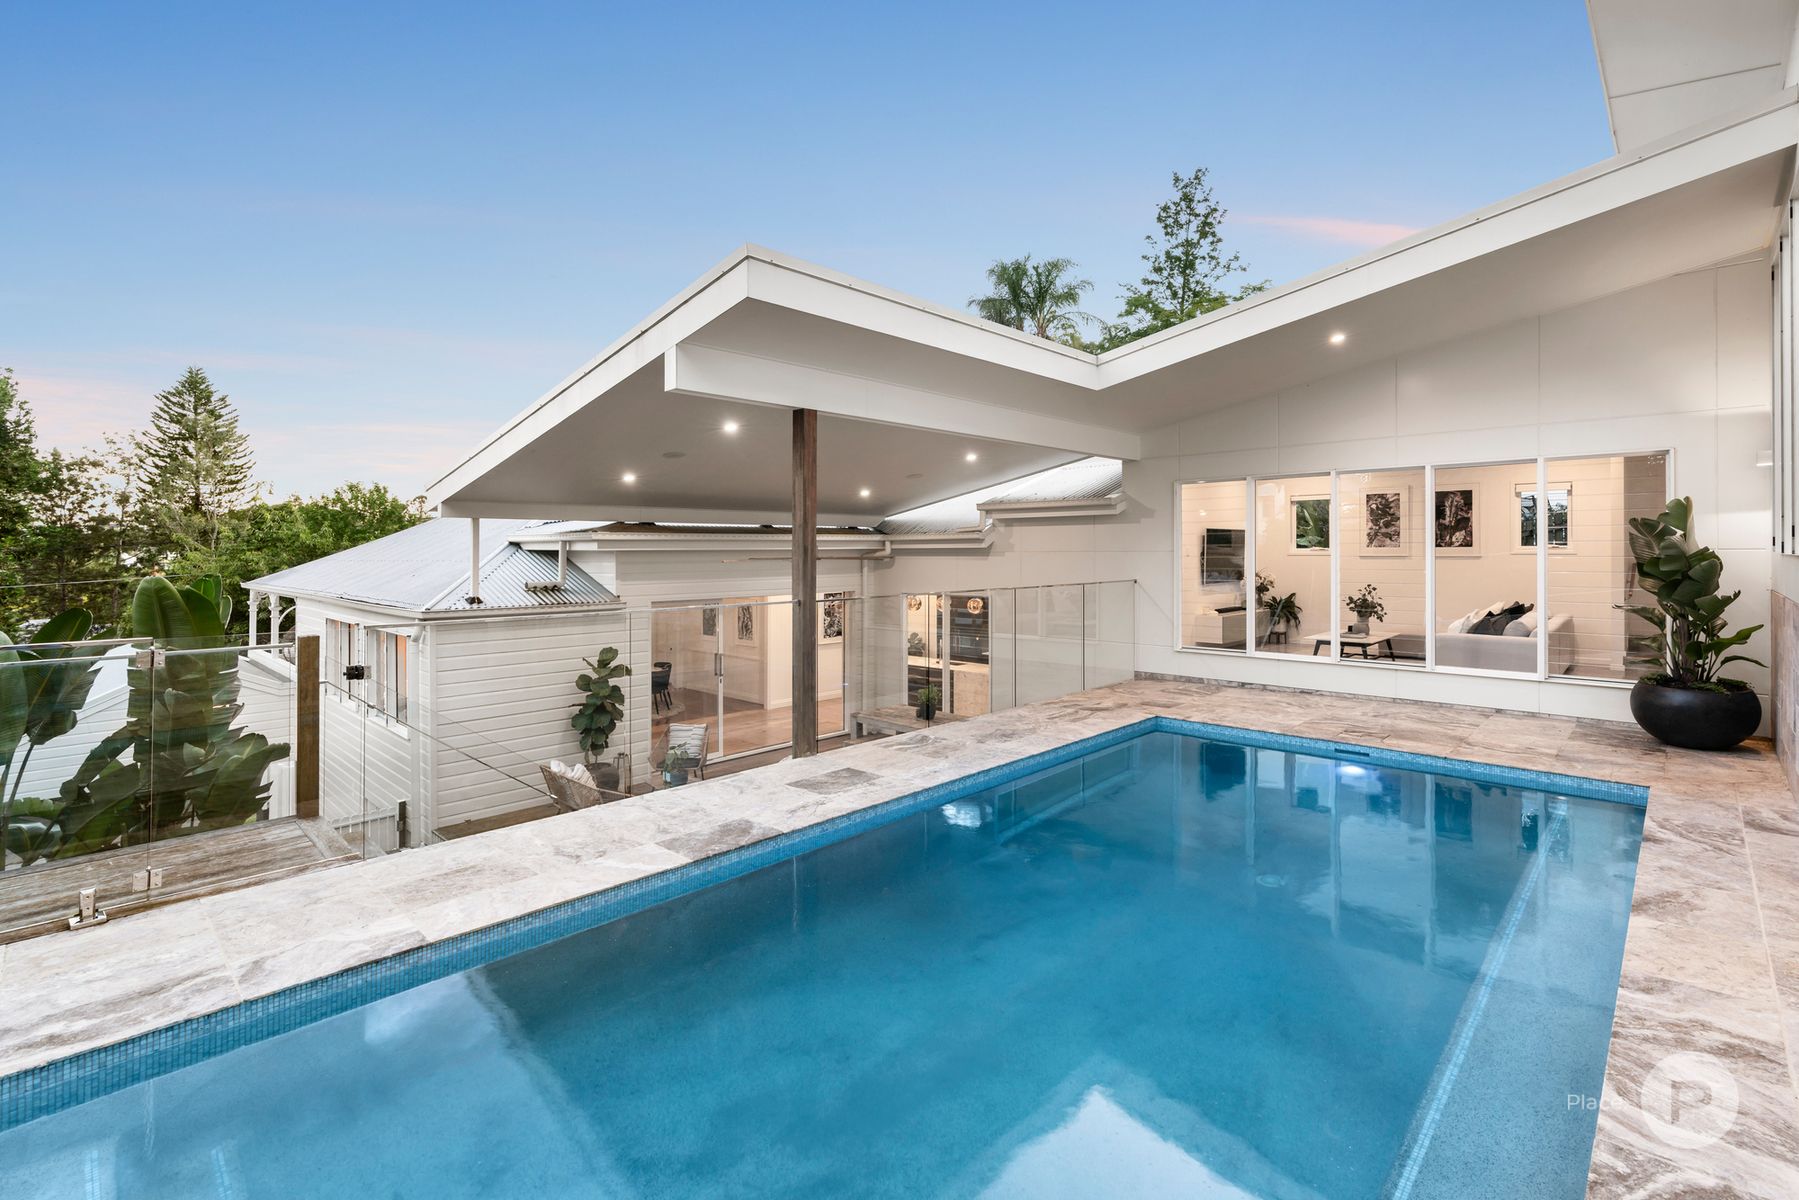 What are Queensland buyers searching for right now, pools